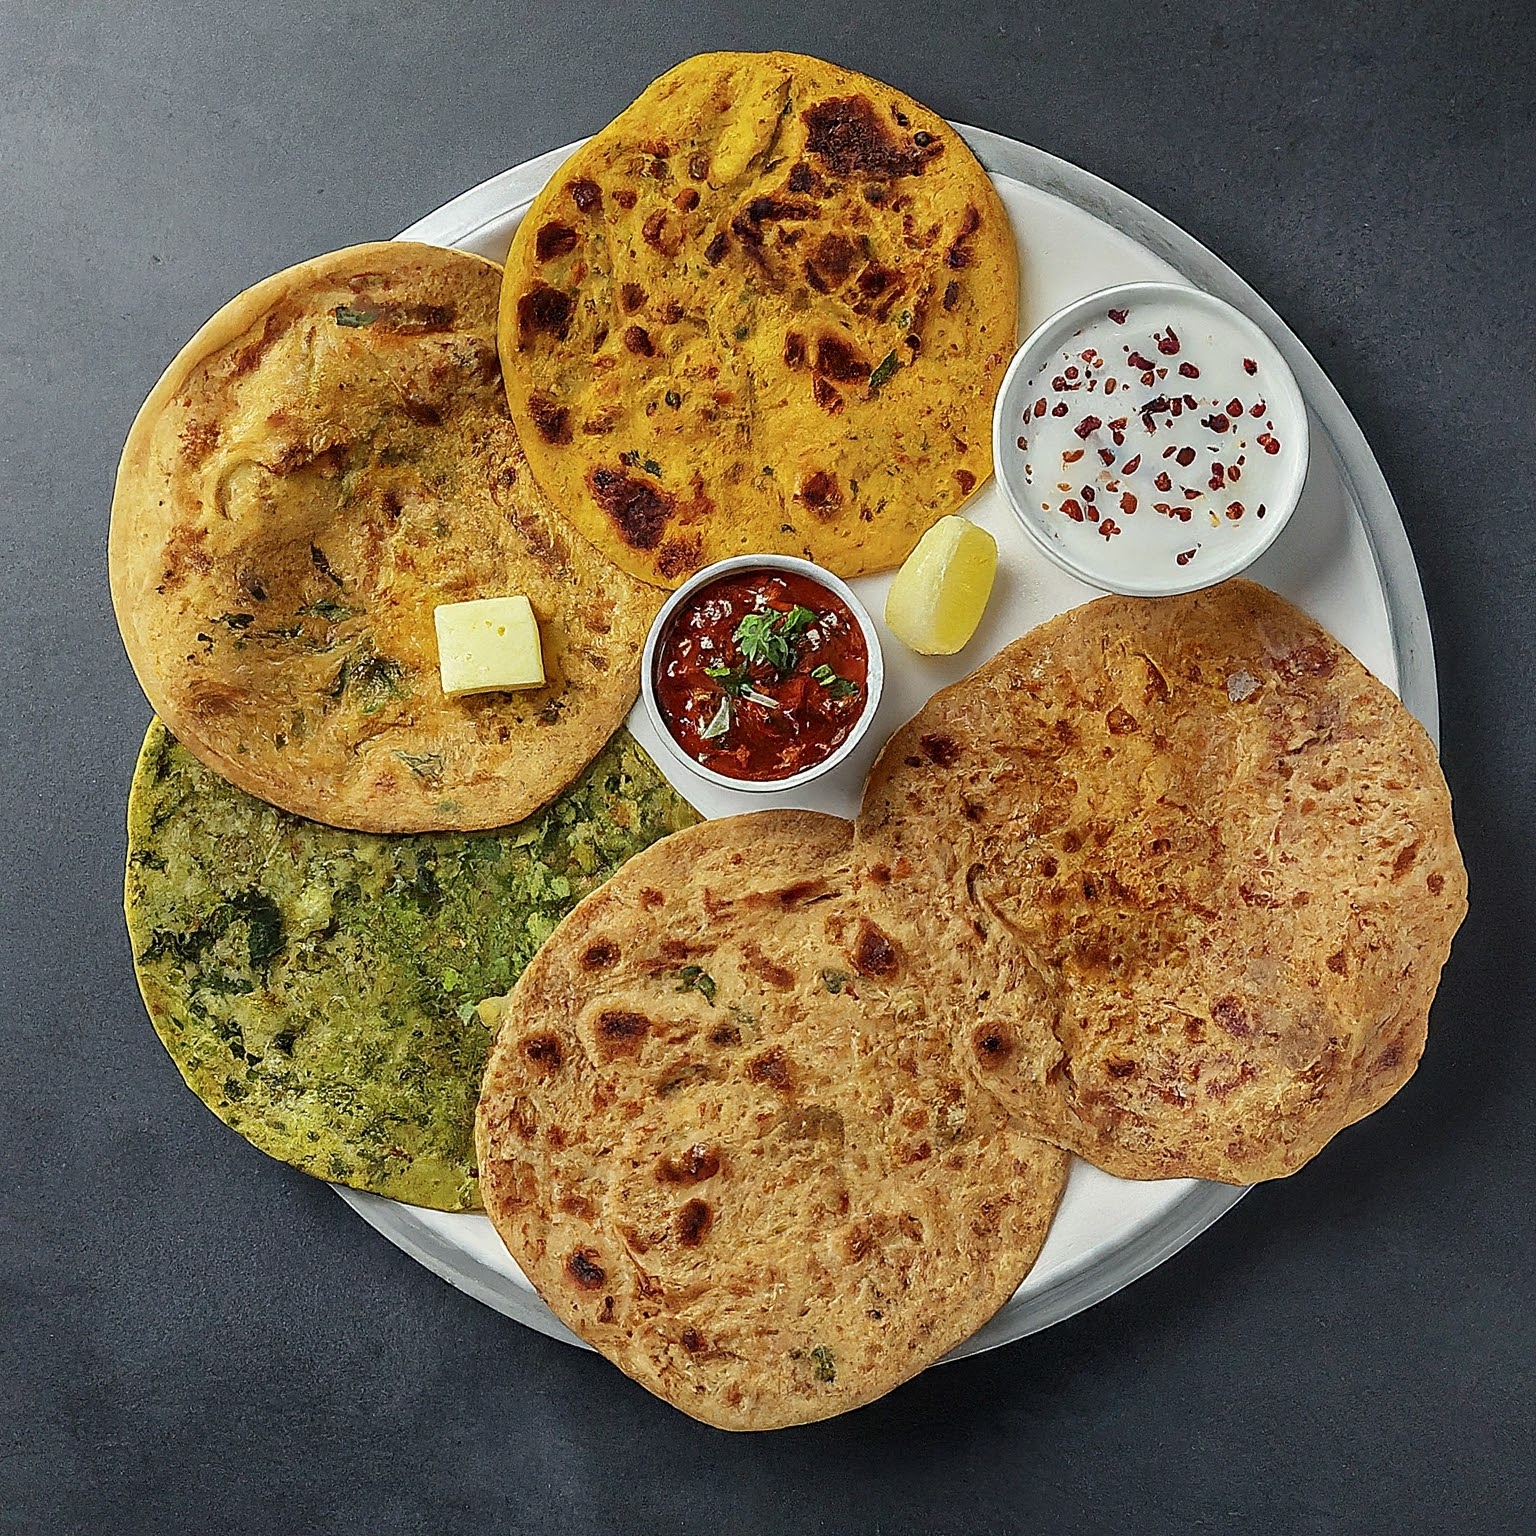 A delicious golden brown paratha, a layered flatbread from North India.